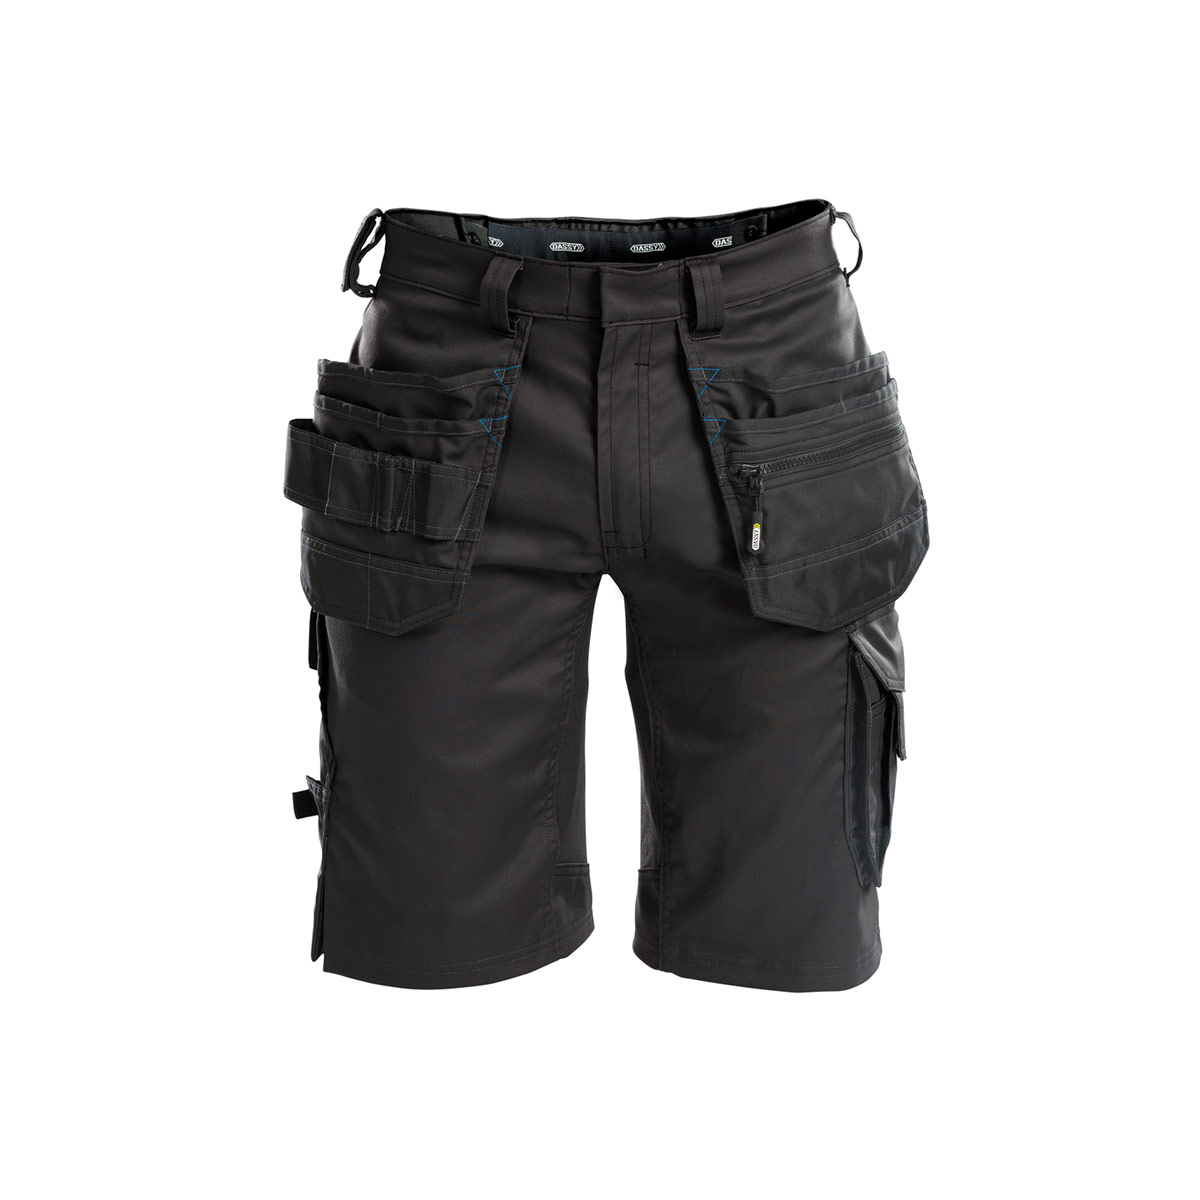 DASSY Trix work shorts with stretch and holster pockets